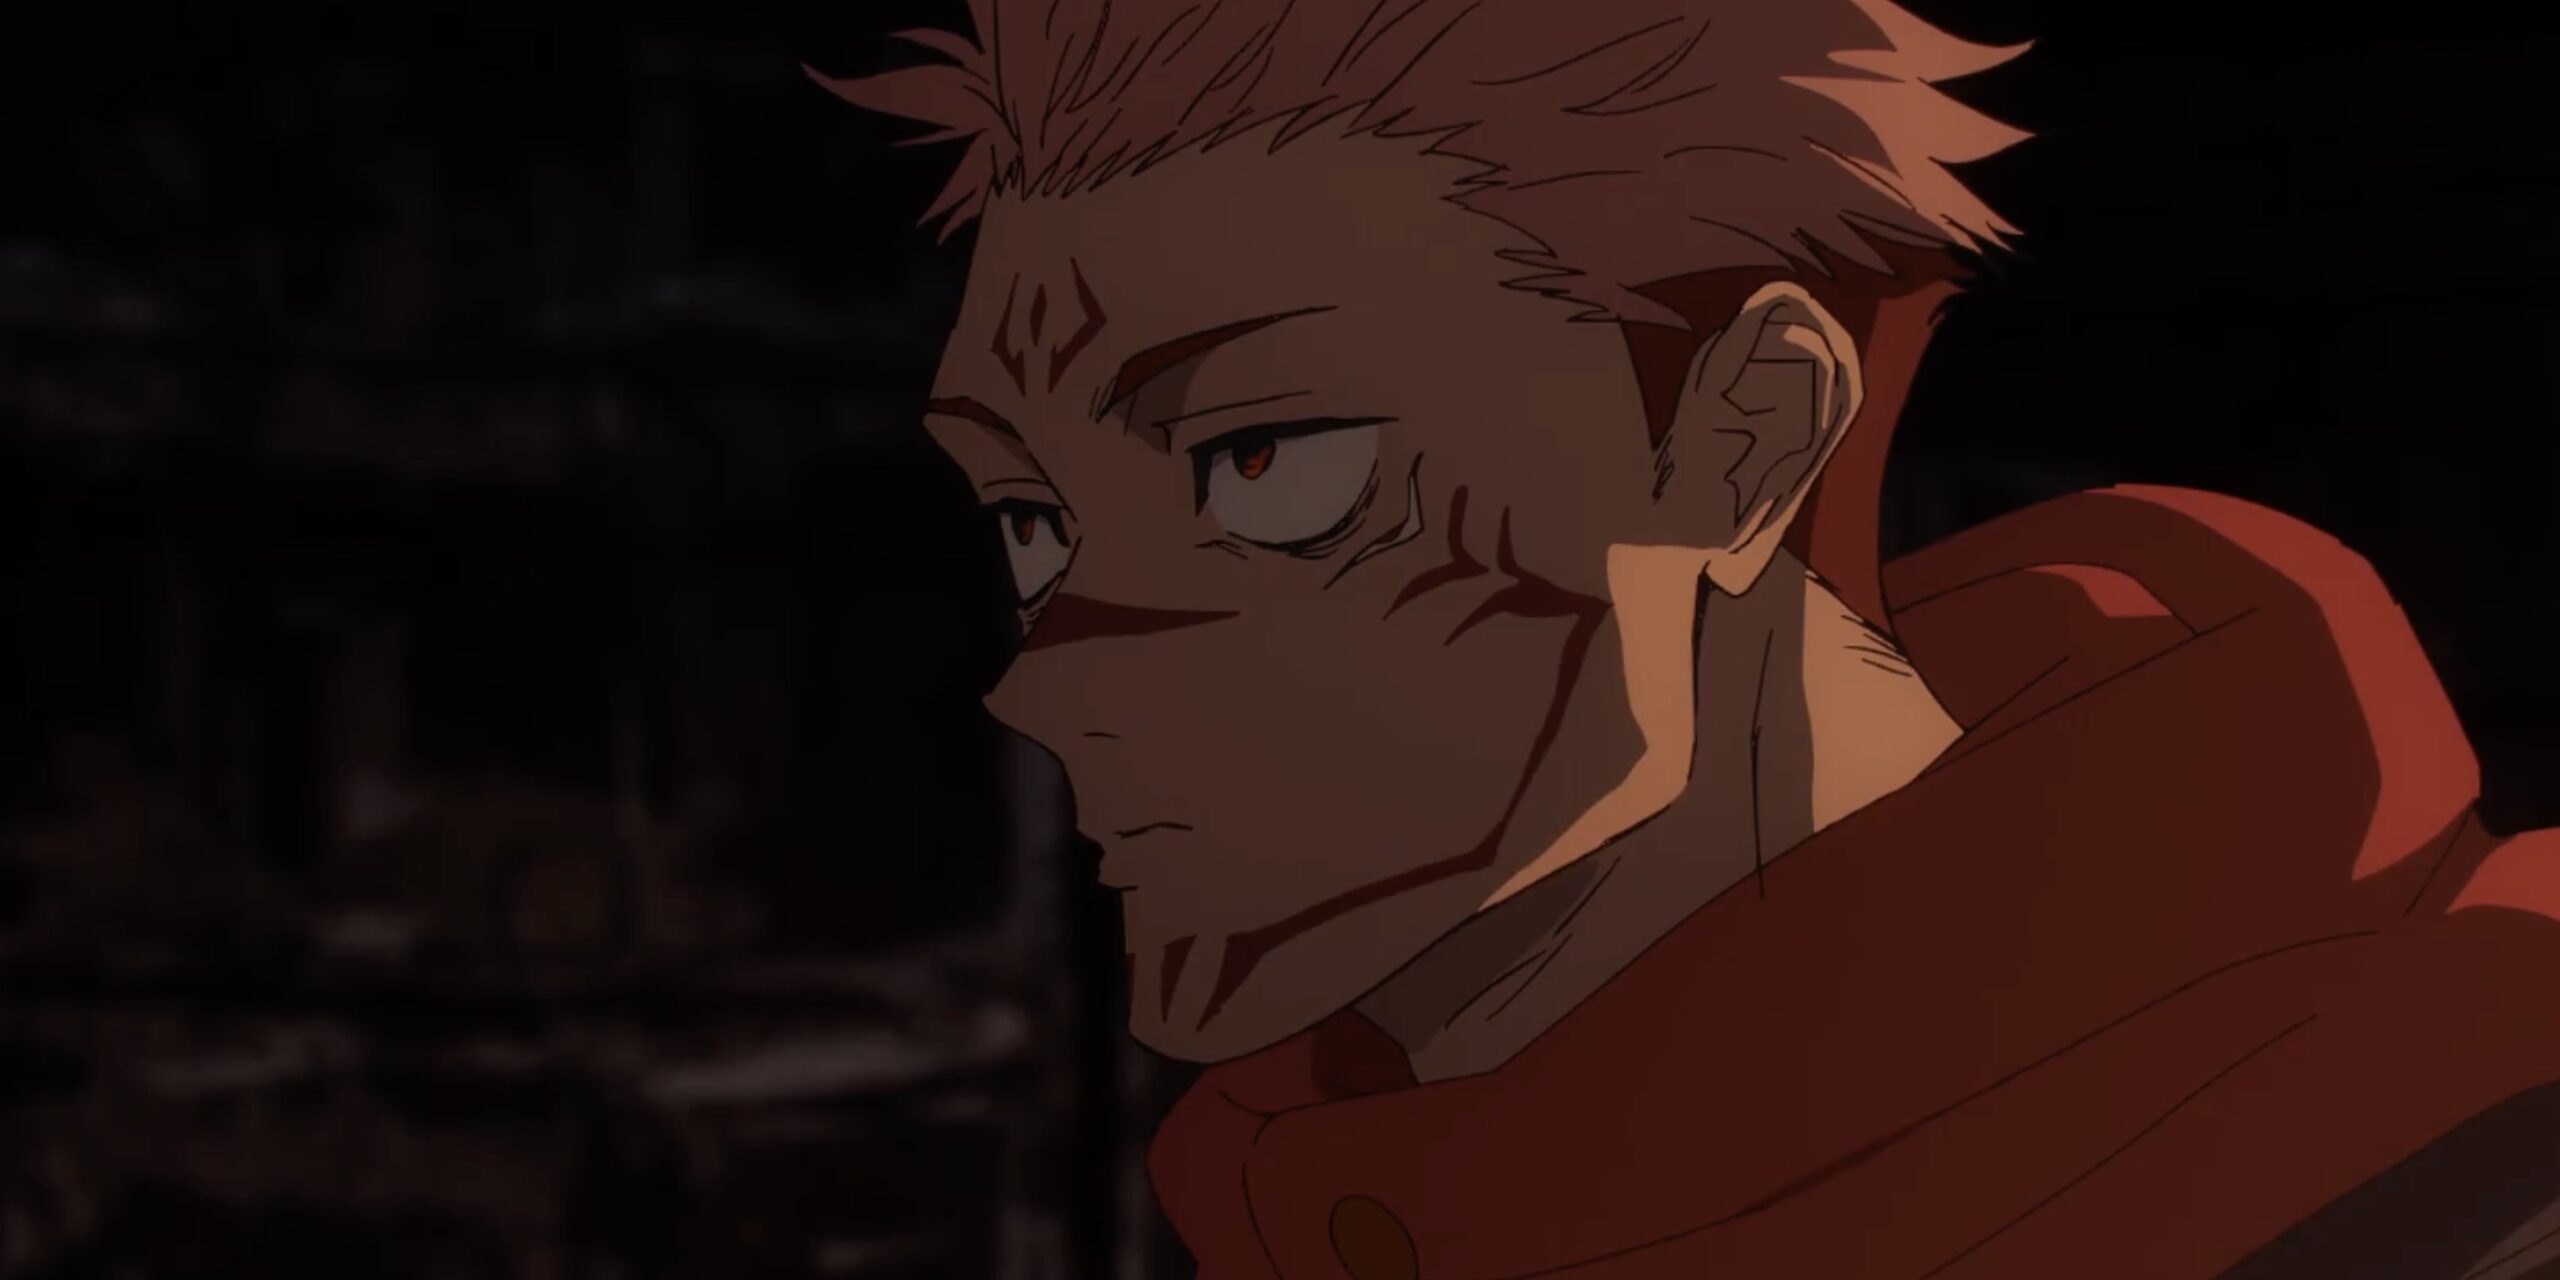 20 Jujutsu Kaisen Characters & How They Would Look In Real Life